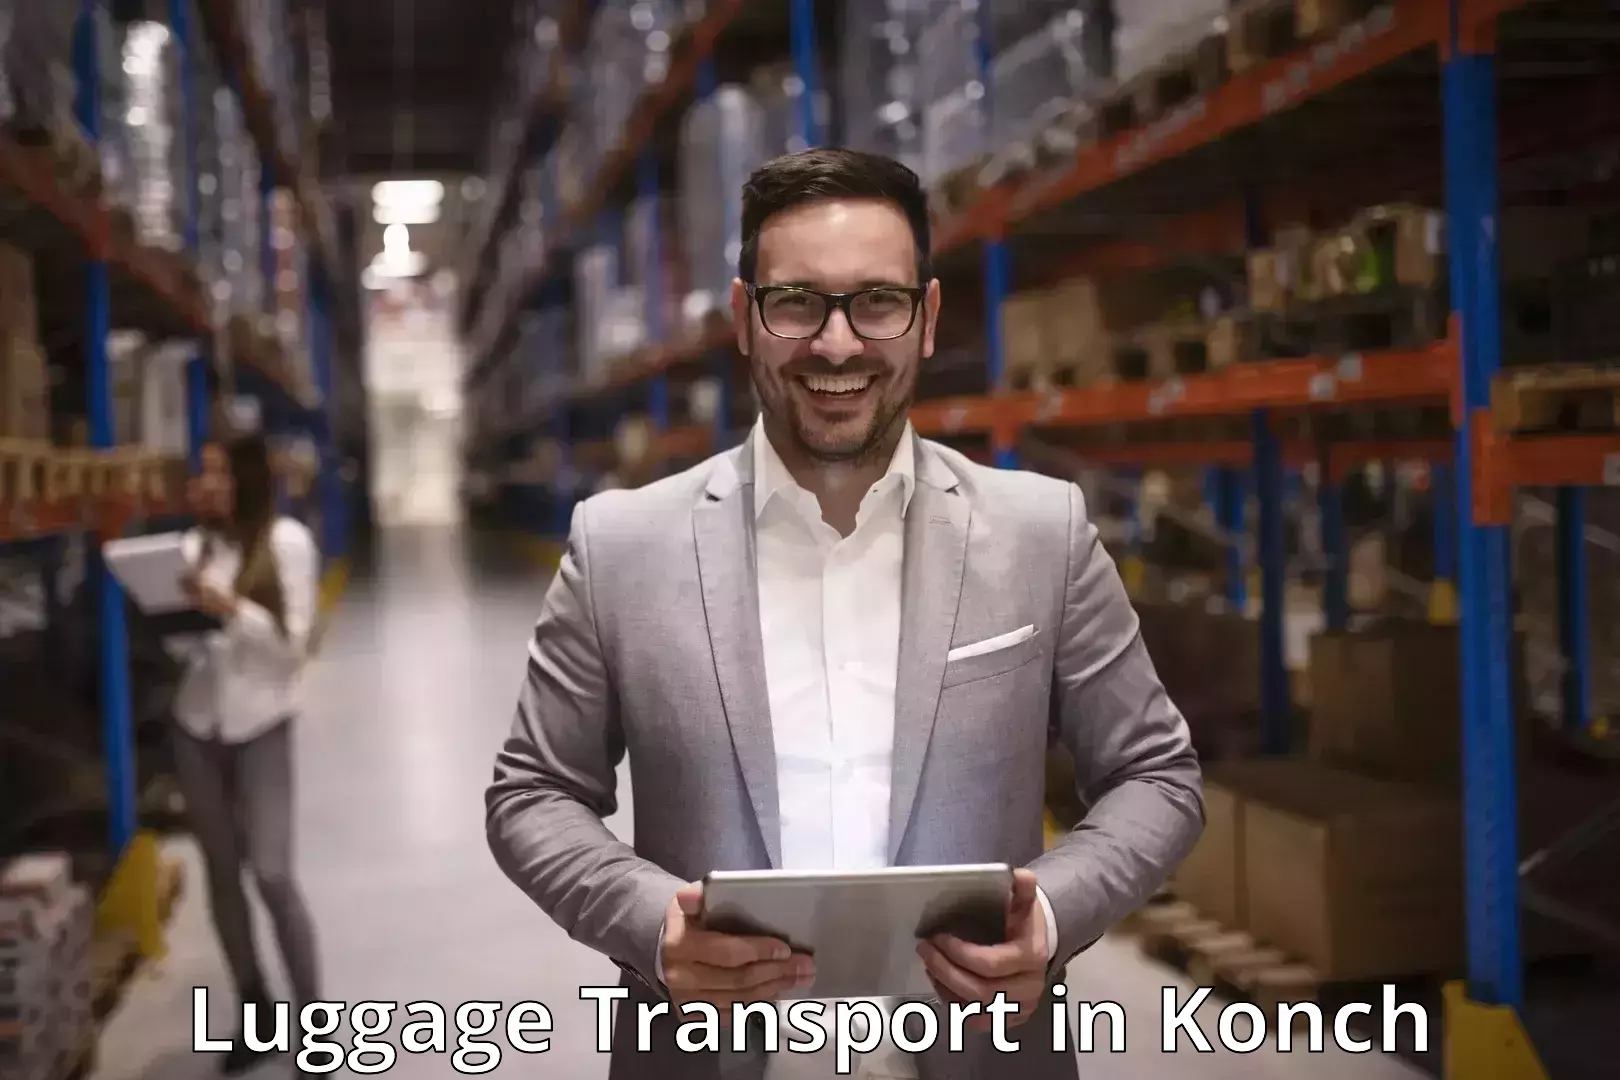 Luggage shipment tracking in Konch